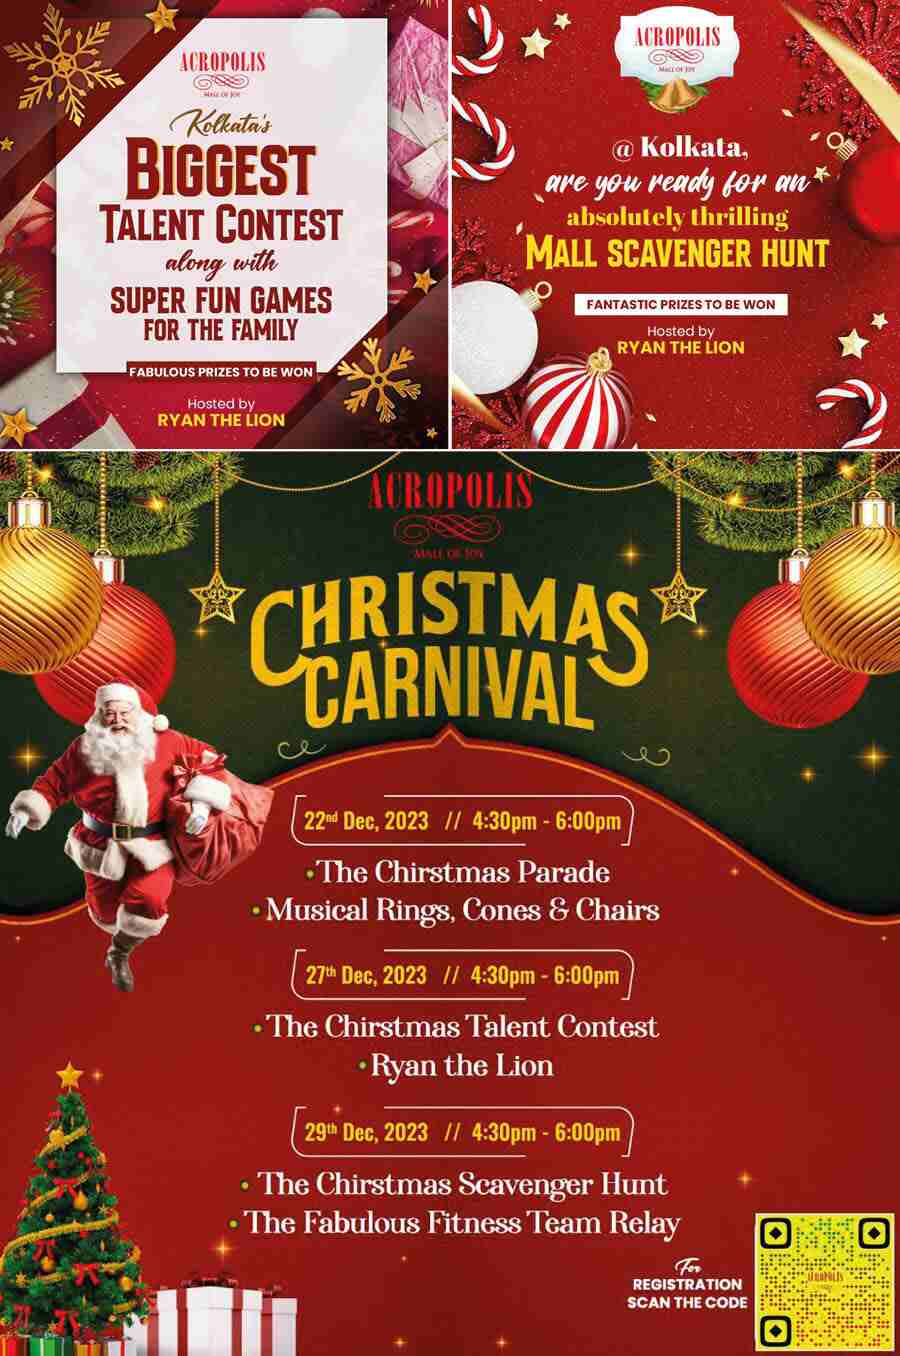 Even though Christmas is over, the festive spirit lingers with ongoing activities at the mall. Save the dates as Acropolis Mall has exciting plans in store for December 27 and 29. The Christmas Talent Contest, which is on December 27, to be hosted by Ryan the Lion, will showcase a variety of talents—singing, dancing, drawing and more. On December 29, young detectives can join the Christmas Scavenger Hunt, searching for hidden prizes at the mall. Additionally, the Fabulous Fitness Team Relay on Friday invites both children and parents to participate together. You can drop by at 4.30 pm on both days to witness and participate in the ongoing Christmas Carnival at Acropolis